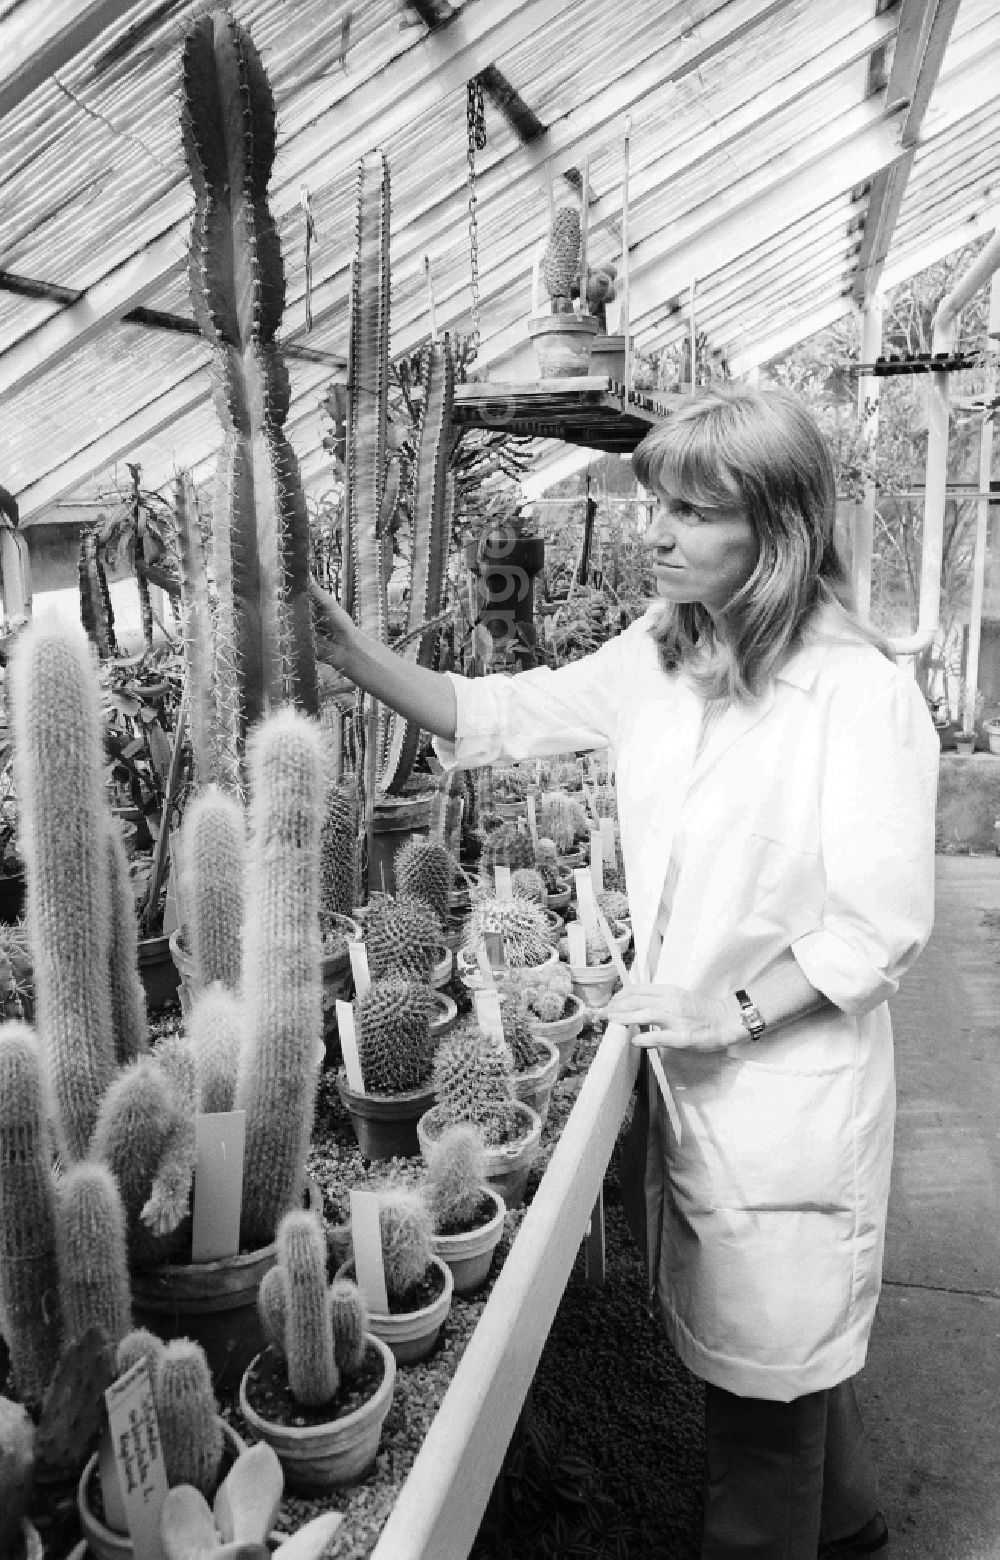 GDR photo archive: Berlin - An employee controls the cactus breeding of the Spaeth - Arboretums on pest infestation in Berlin, the former capital of the GDR, German democratic republic